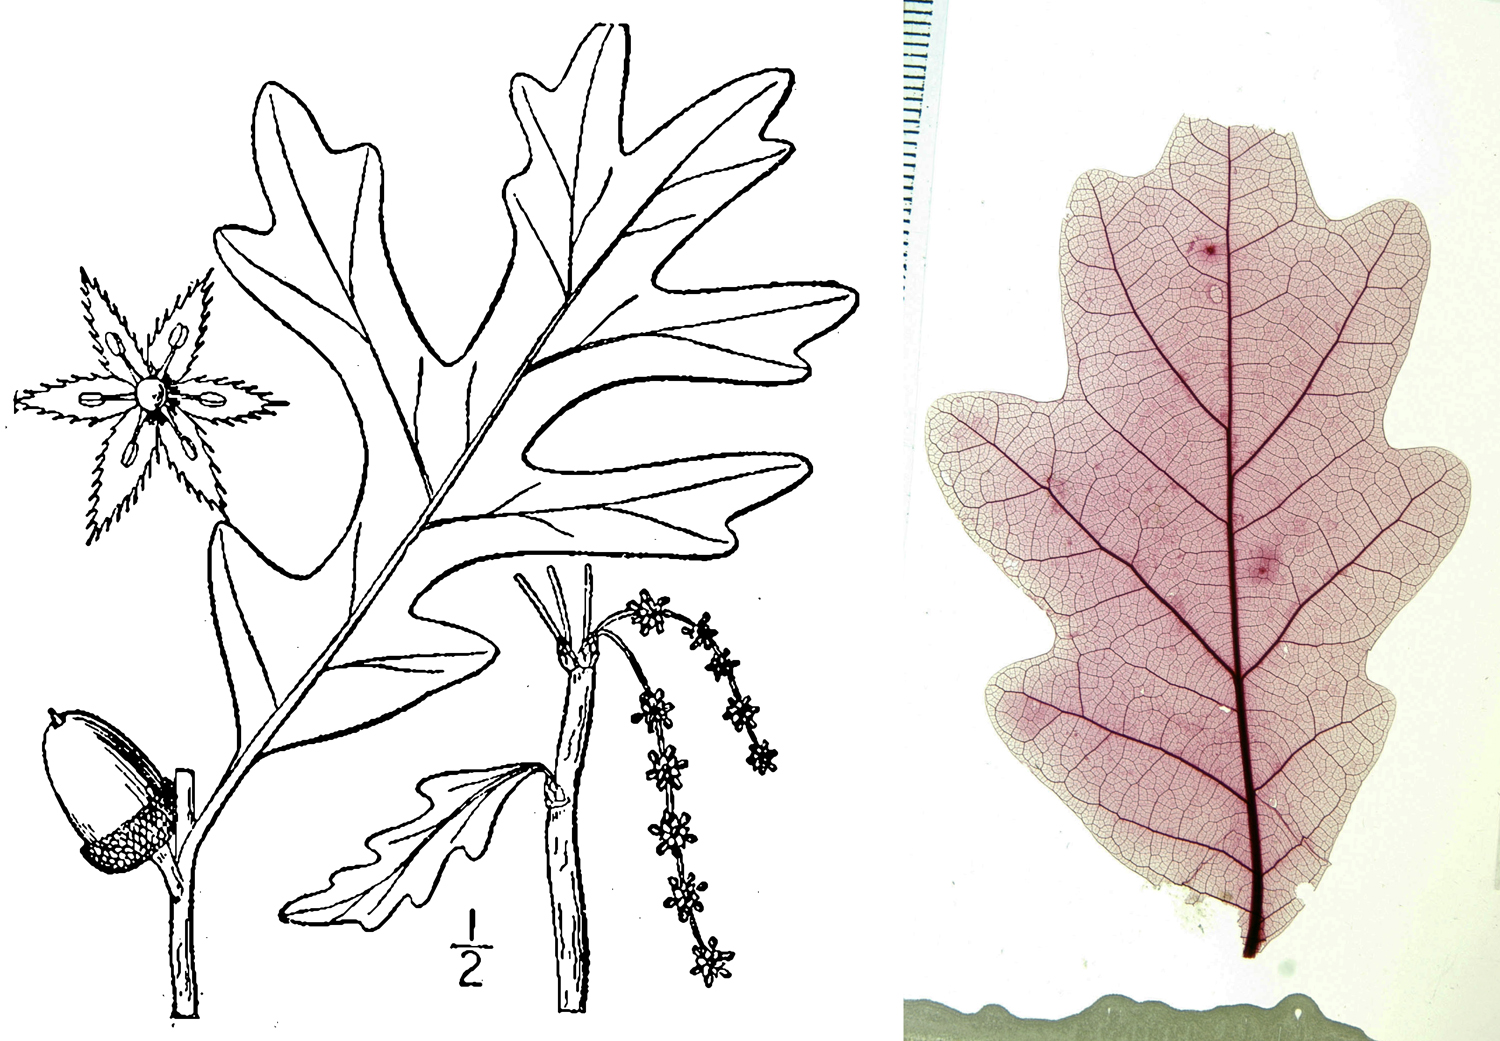 2-Panel image showing white oak leaves. Panel 1: Simplified line illustration of white oak showing few details. Panel 2: Cleared and stained leaf of white oak showing full venation pattern.